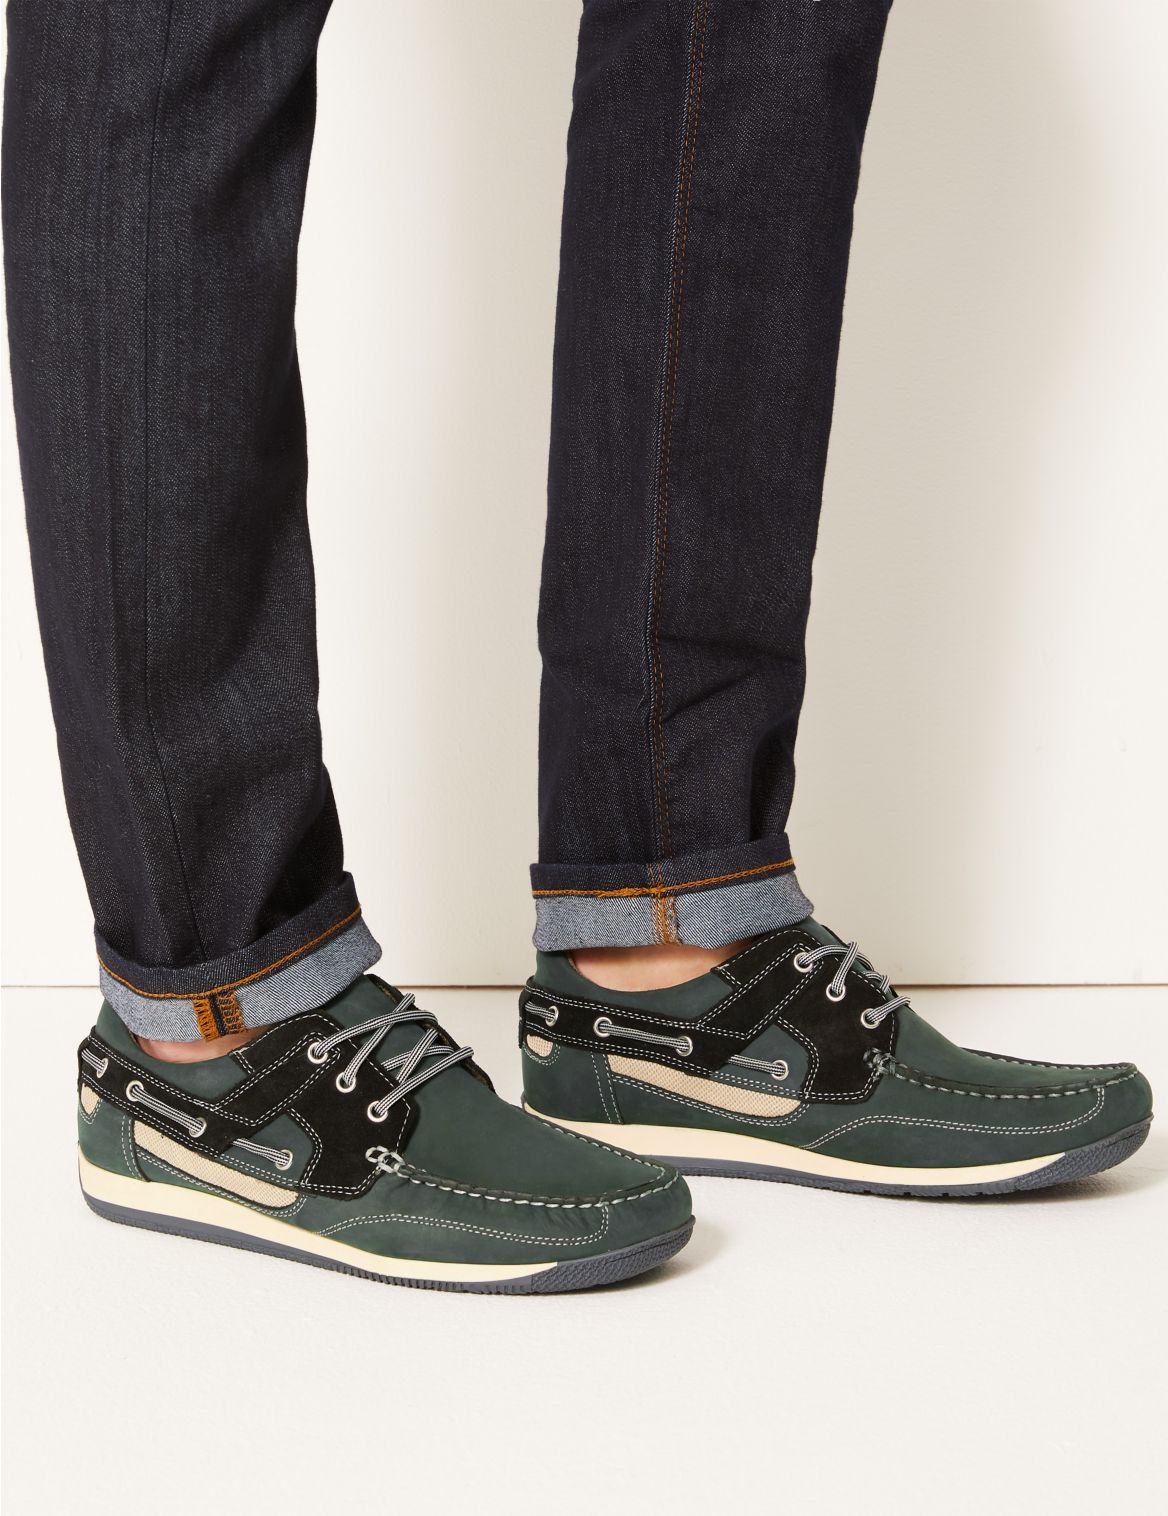 Leather Boat Shoes navy